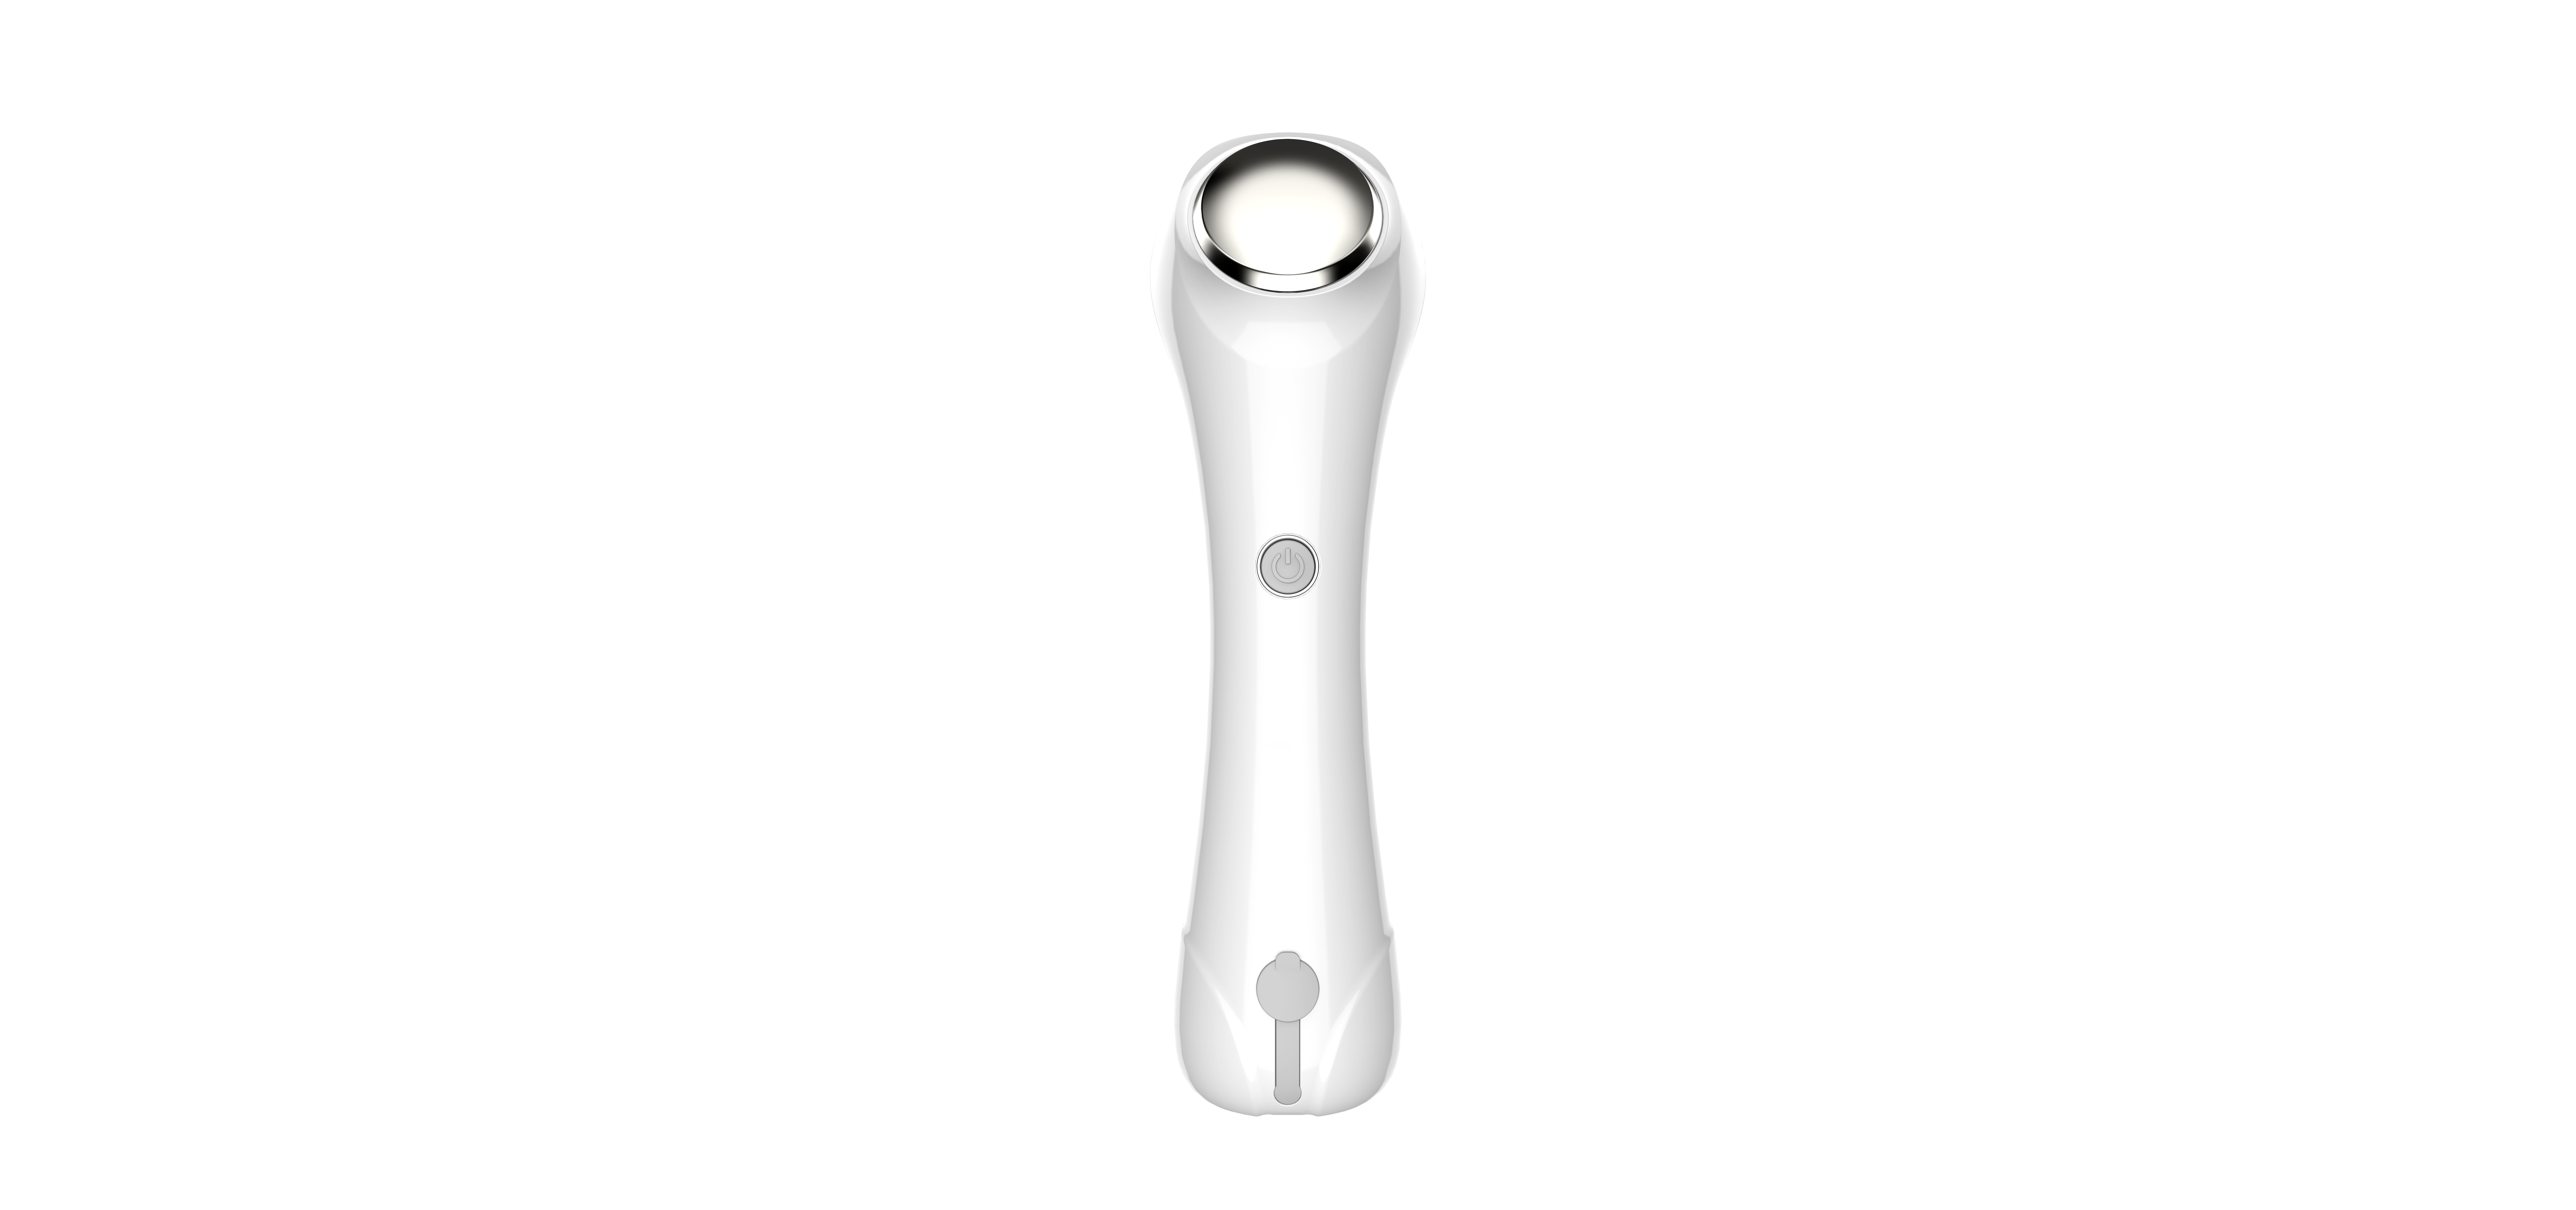 Electric facial cleansing massage brush